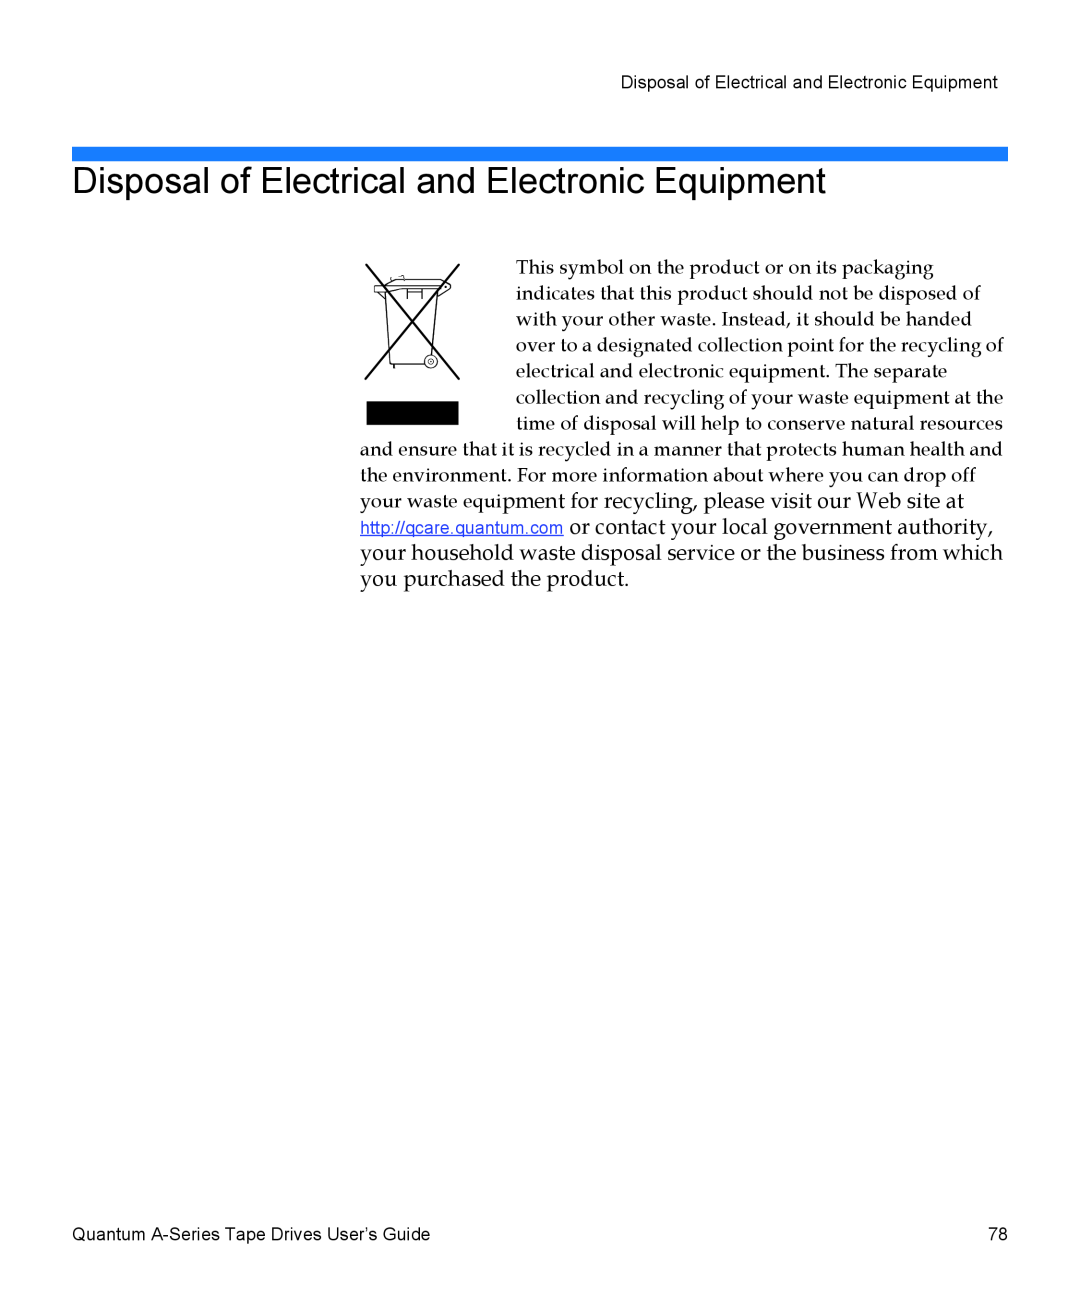 Quantum A-Series manual Disposal of Electrical and Electronic Equipment 